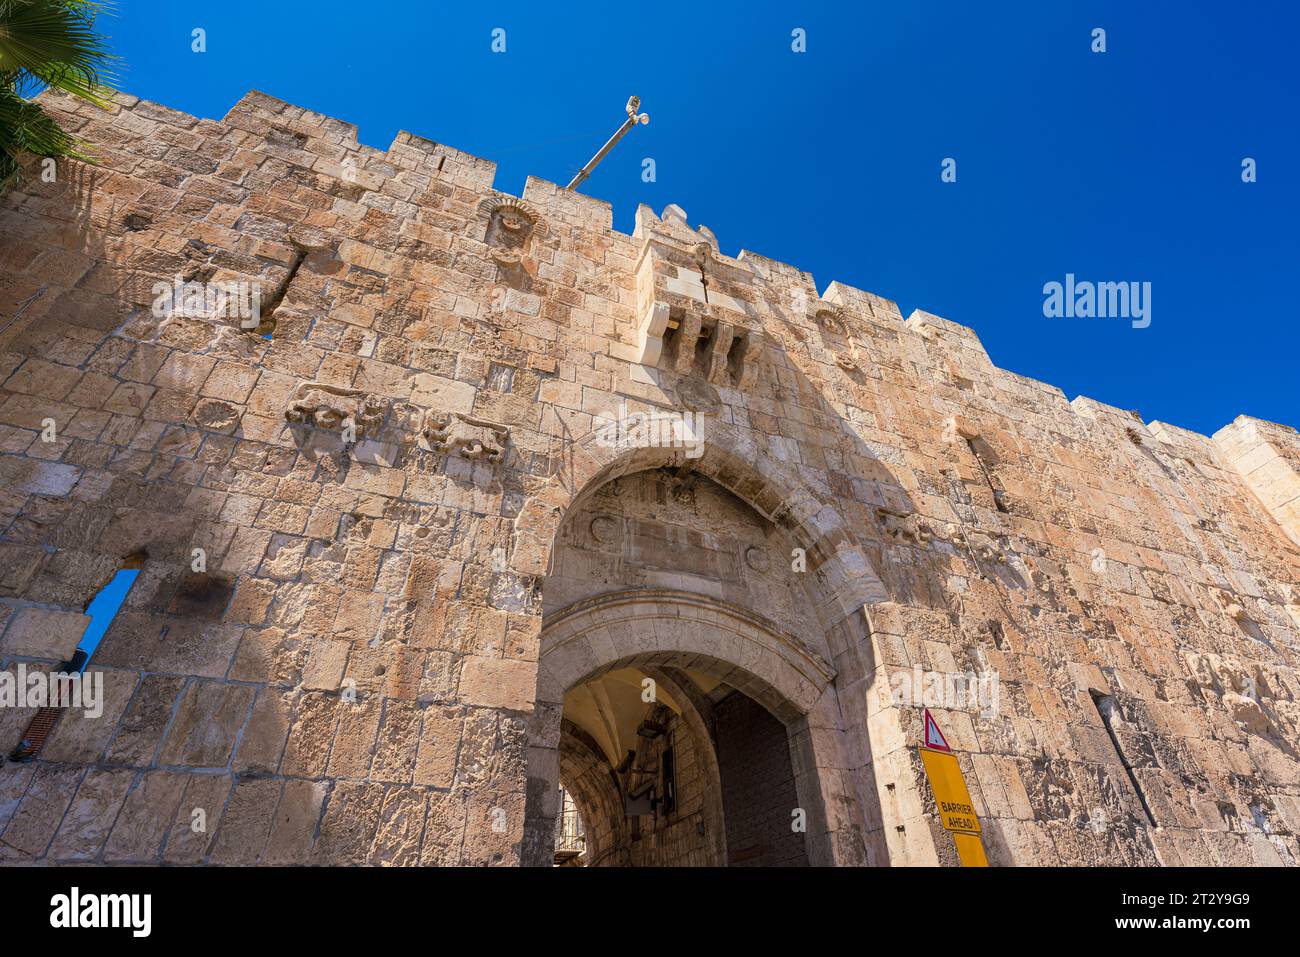 Lions' gate is one of the seven entrances to the Old City of Jerusalem. It is named after the Lions carved on its wall. Stock Photo